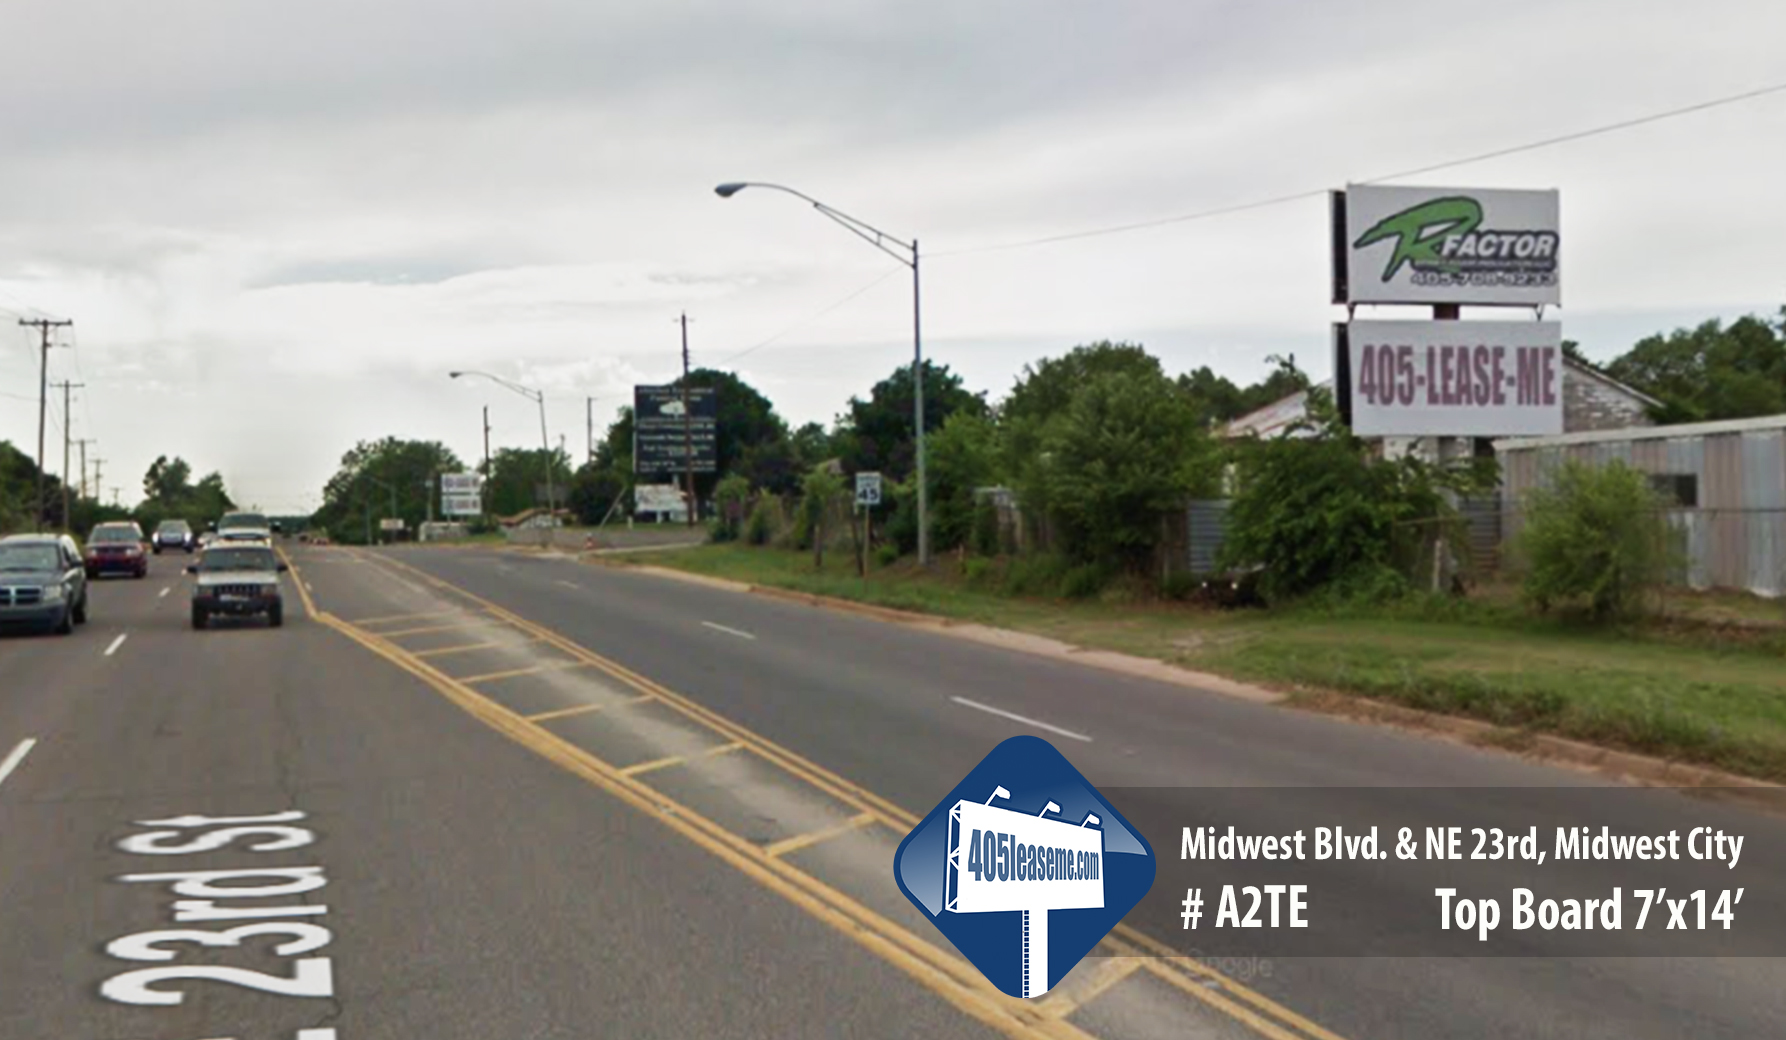 7 Midwest City - A2TE